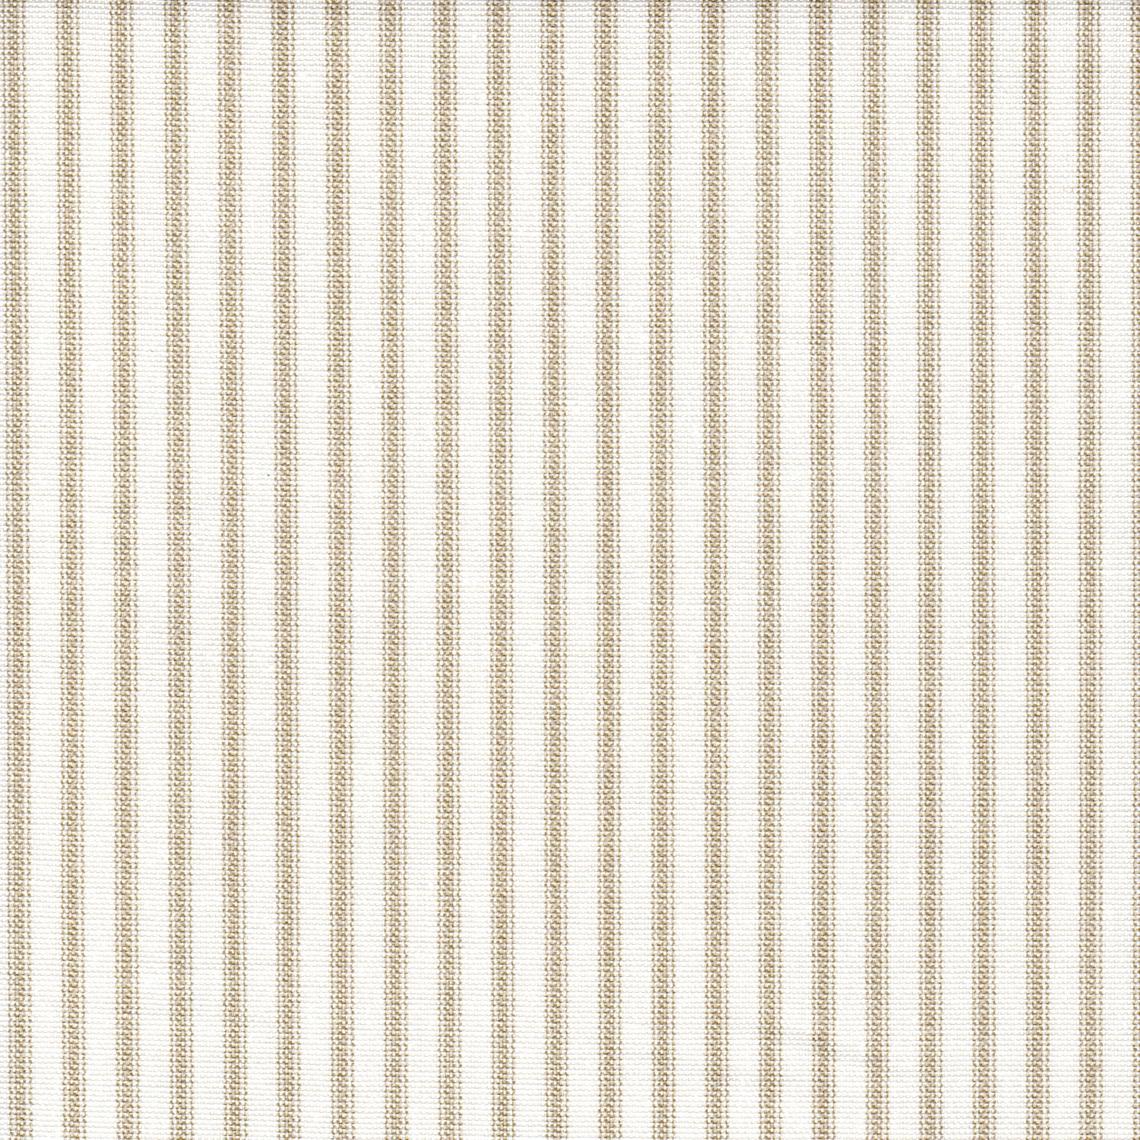 gathered bedskirt in farmhouse sand beige traditional ticking stripe